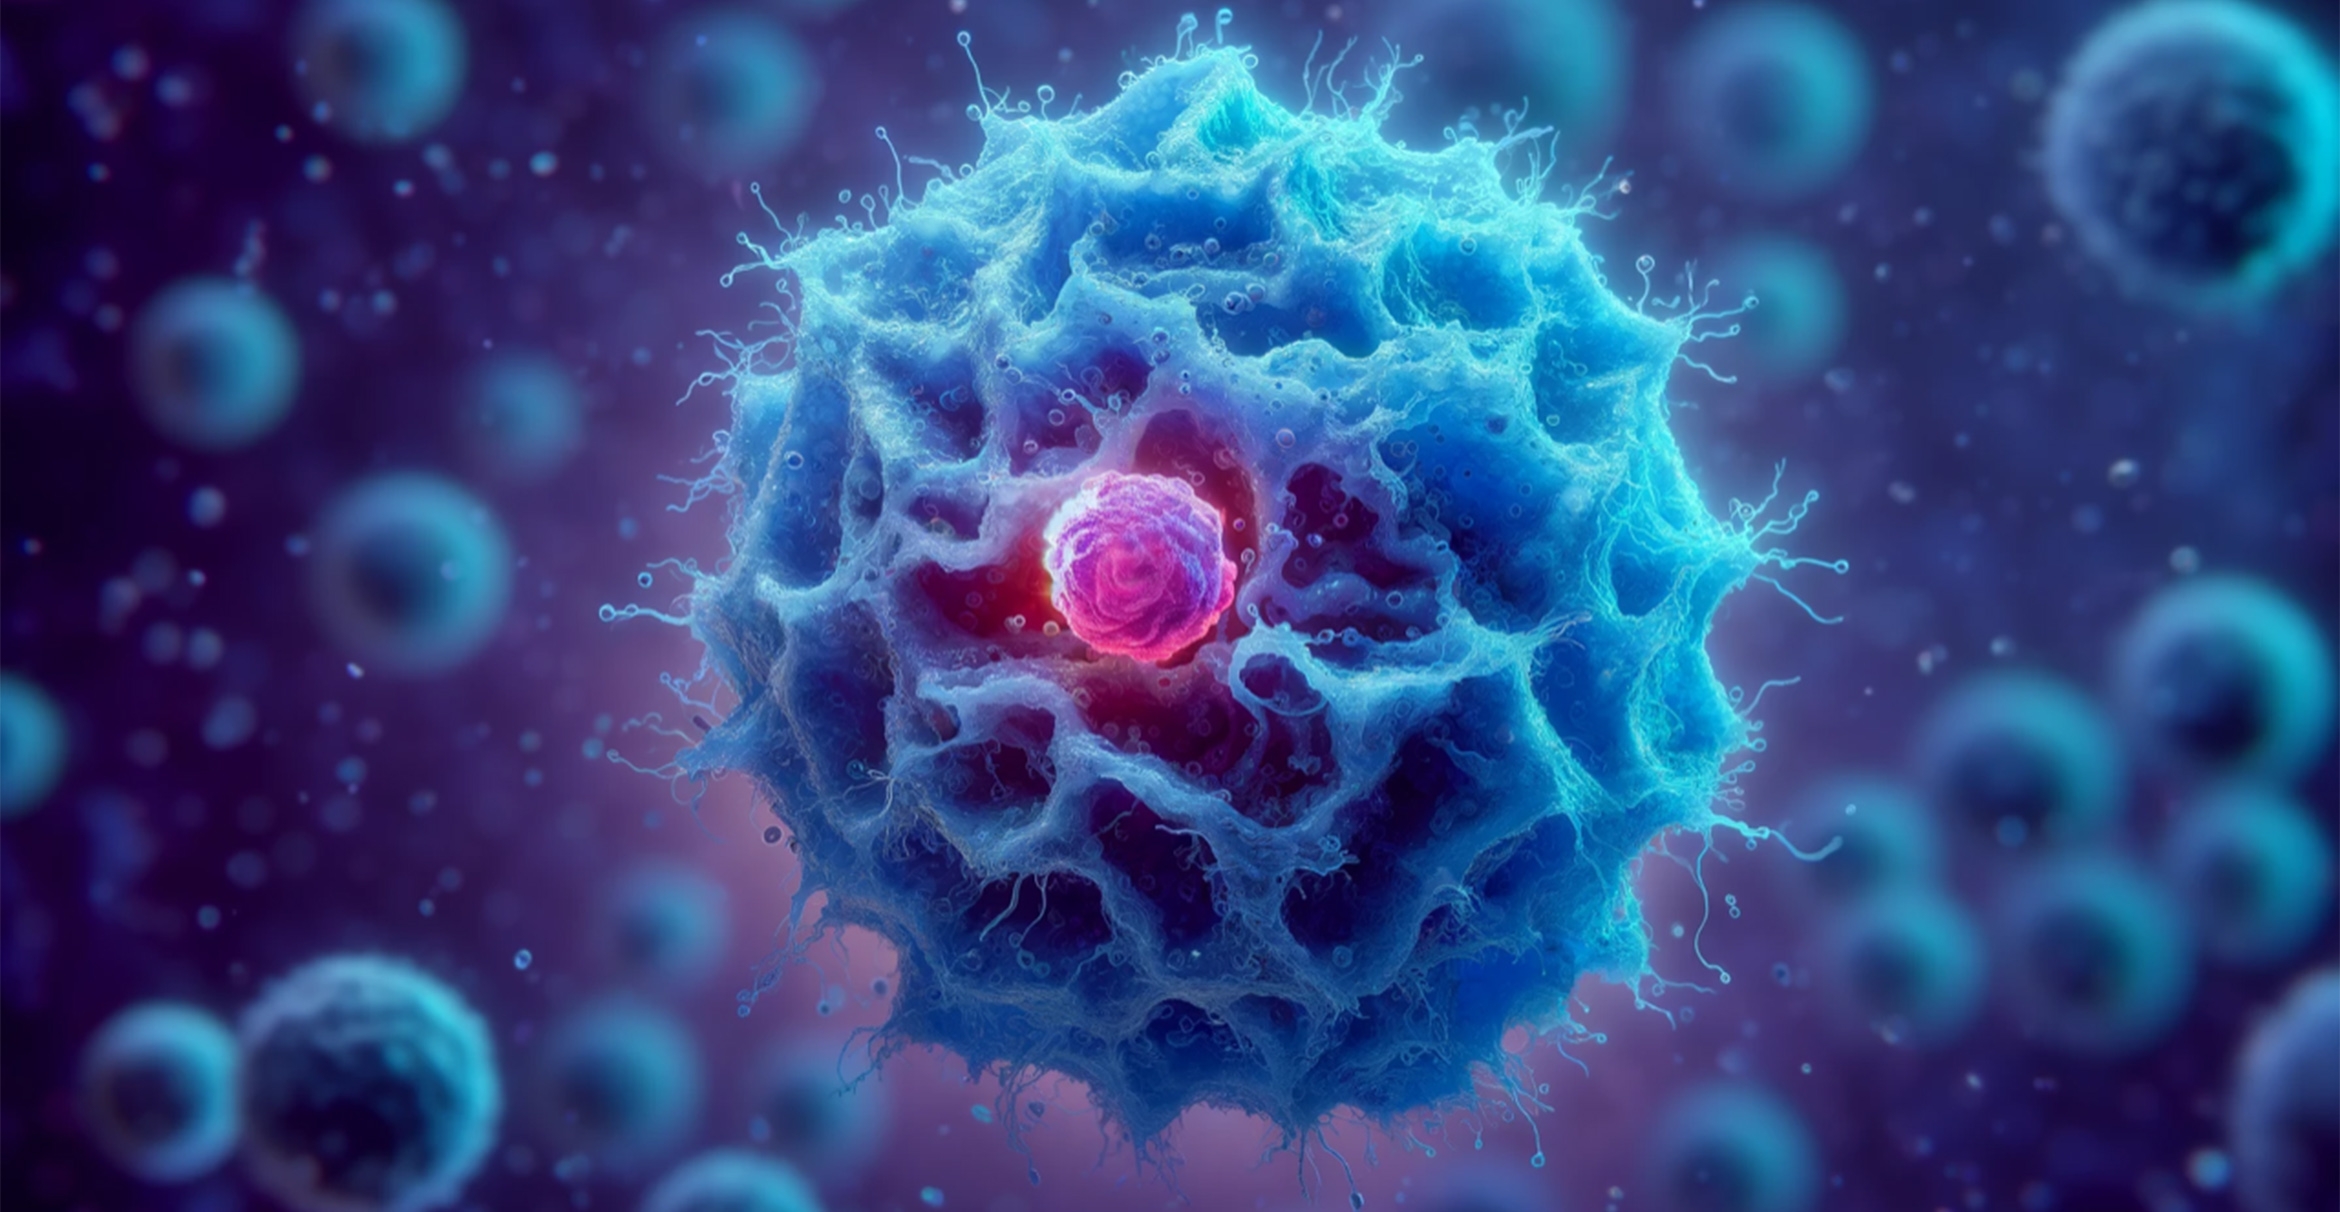 A blue macrophage engulfs a magenta lymphocyte, as rendered by ChatGPT4.